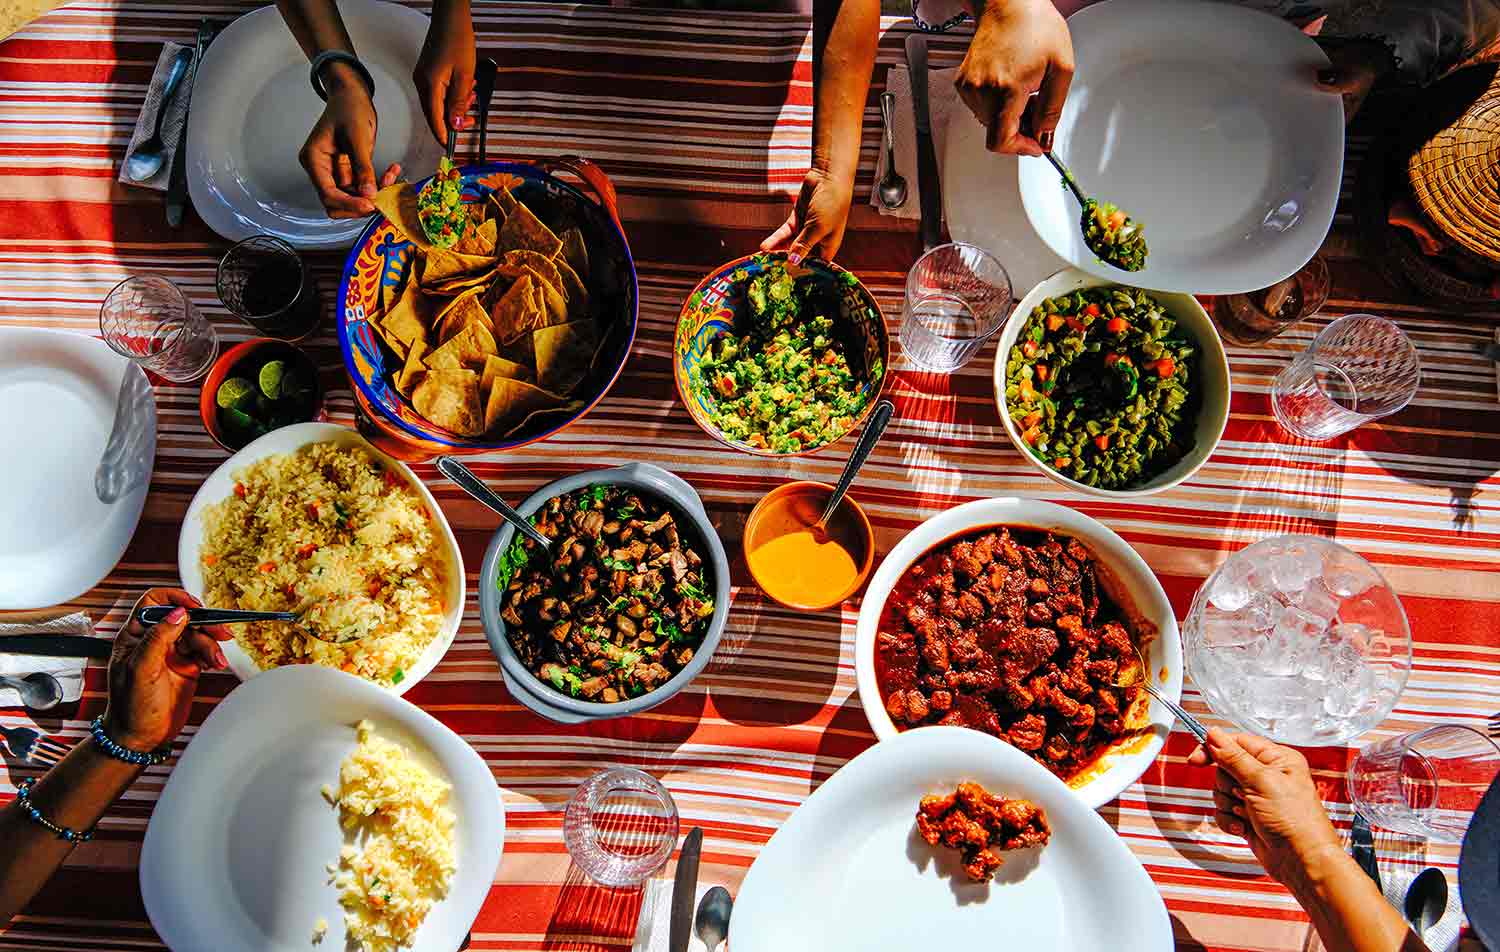 Overhead view of a table with several bowls of food and hands and arms dishing food onto plates.